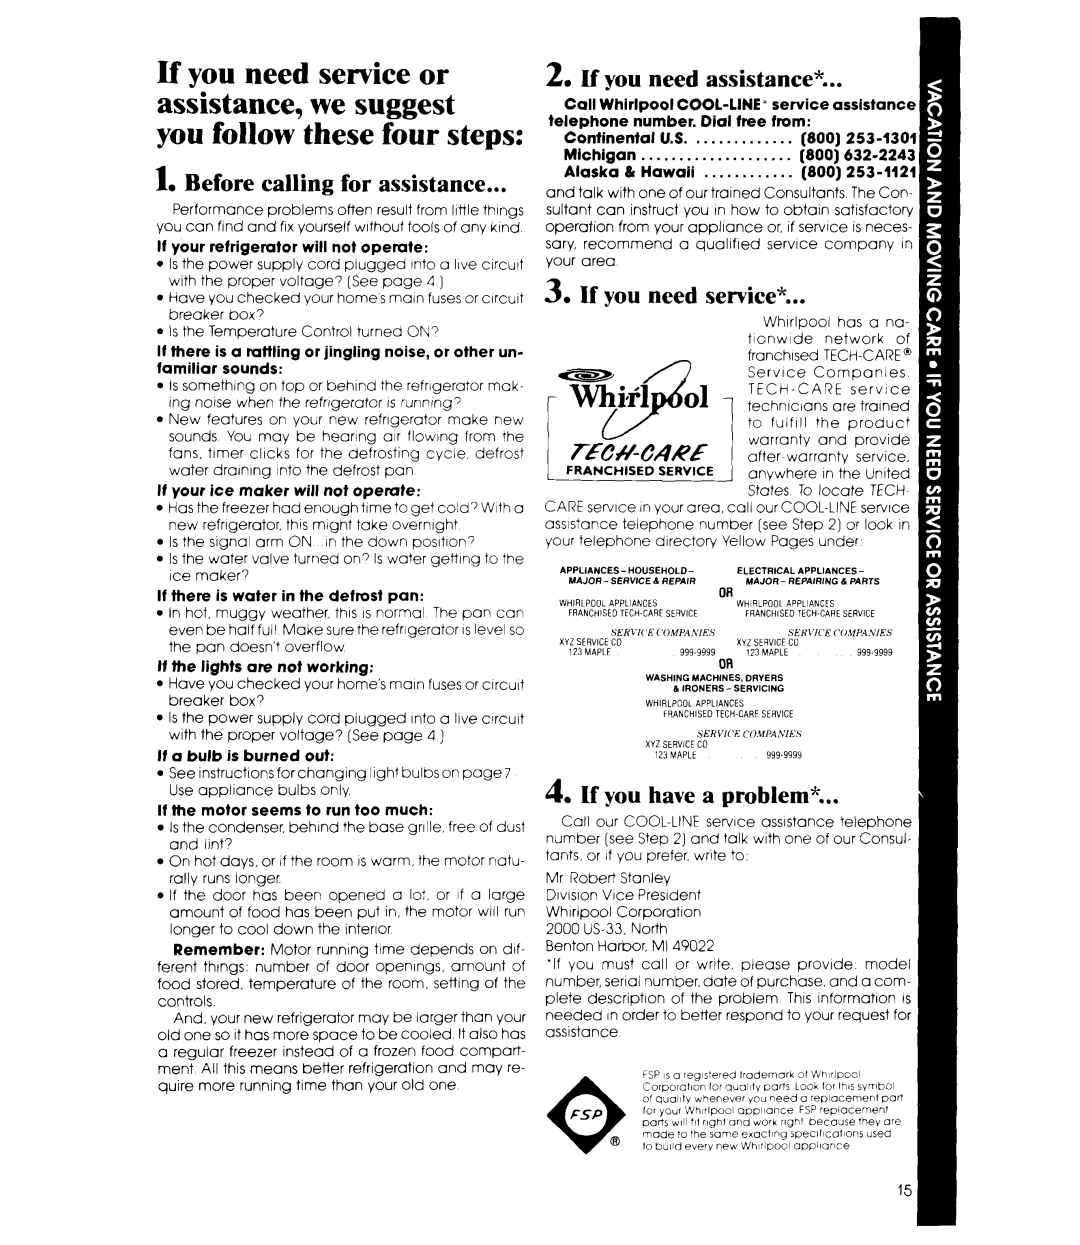 Whirlpool ED22ZM manual Before calling for assistance, If you need assistance, If you need service, If you have a problem 